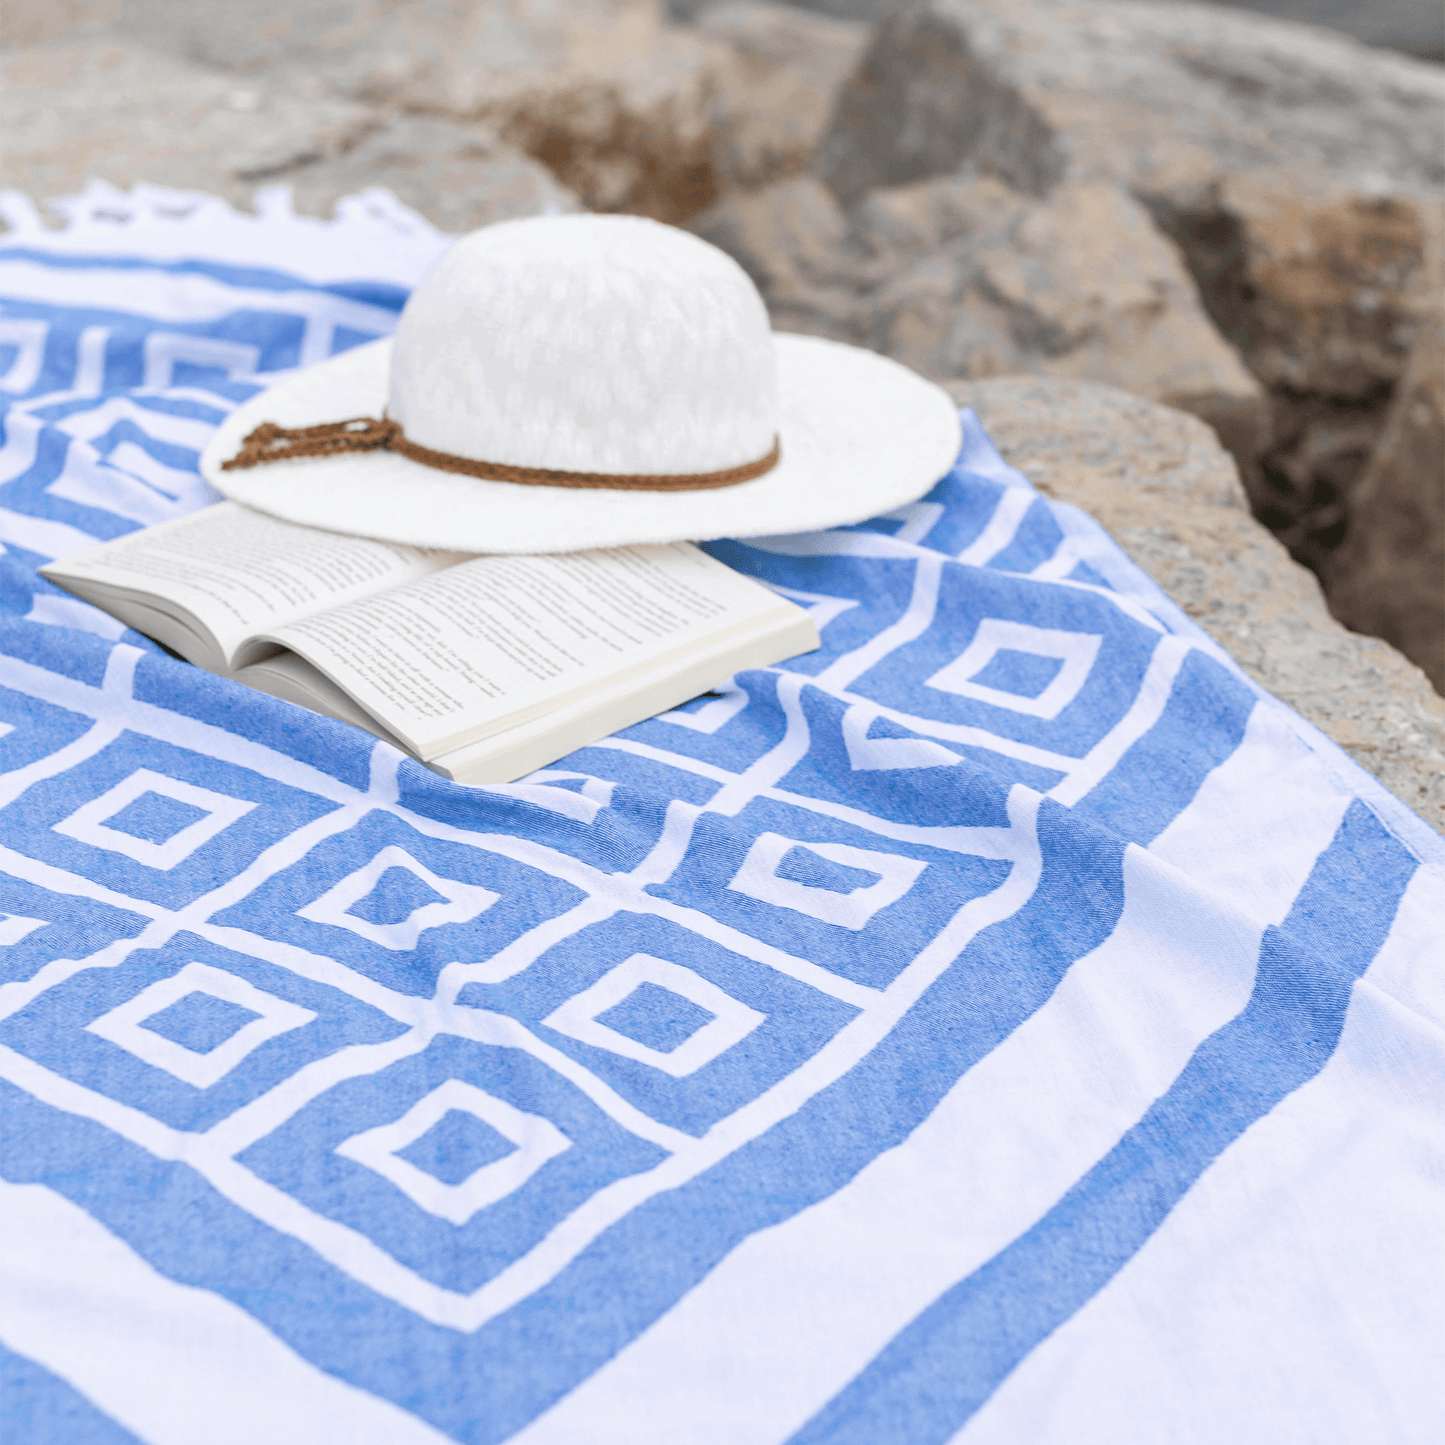 White and blue Turkish towel picnic 